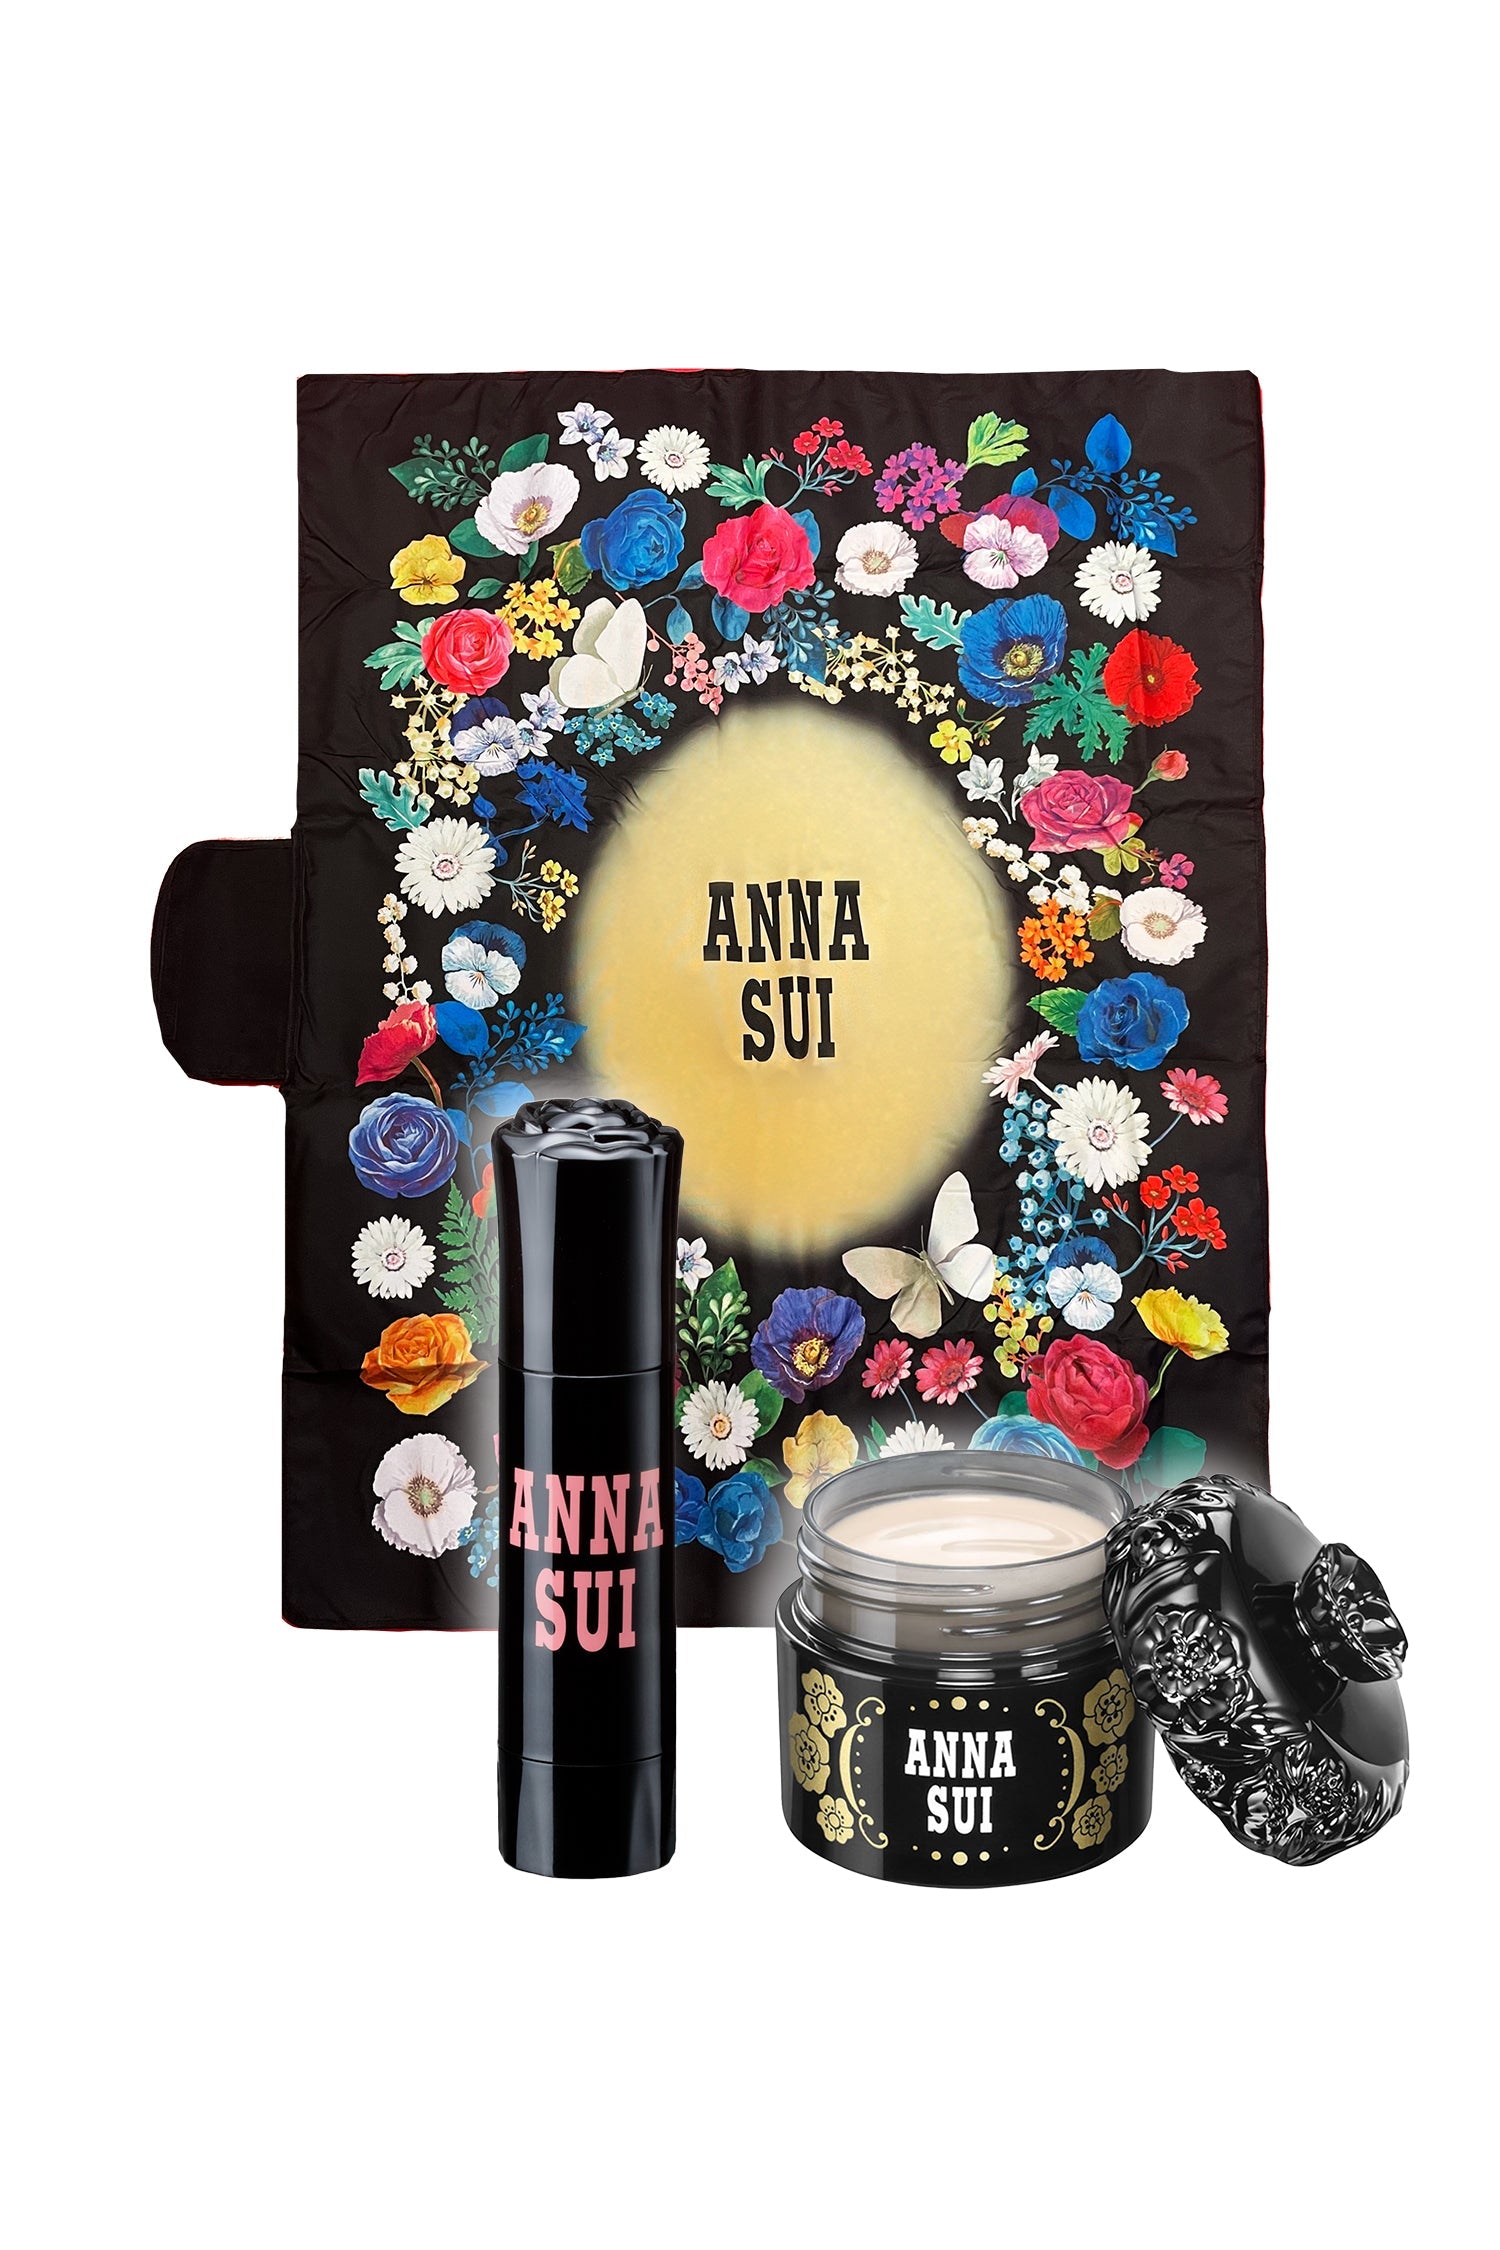 PEACH light cheek and primer set, the Anna Sui on cylinder case with a rose on top plus a black round case  